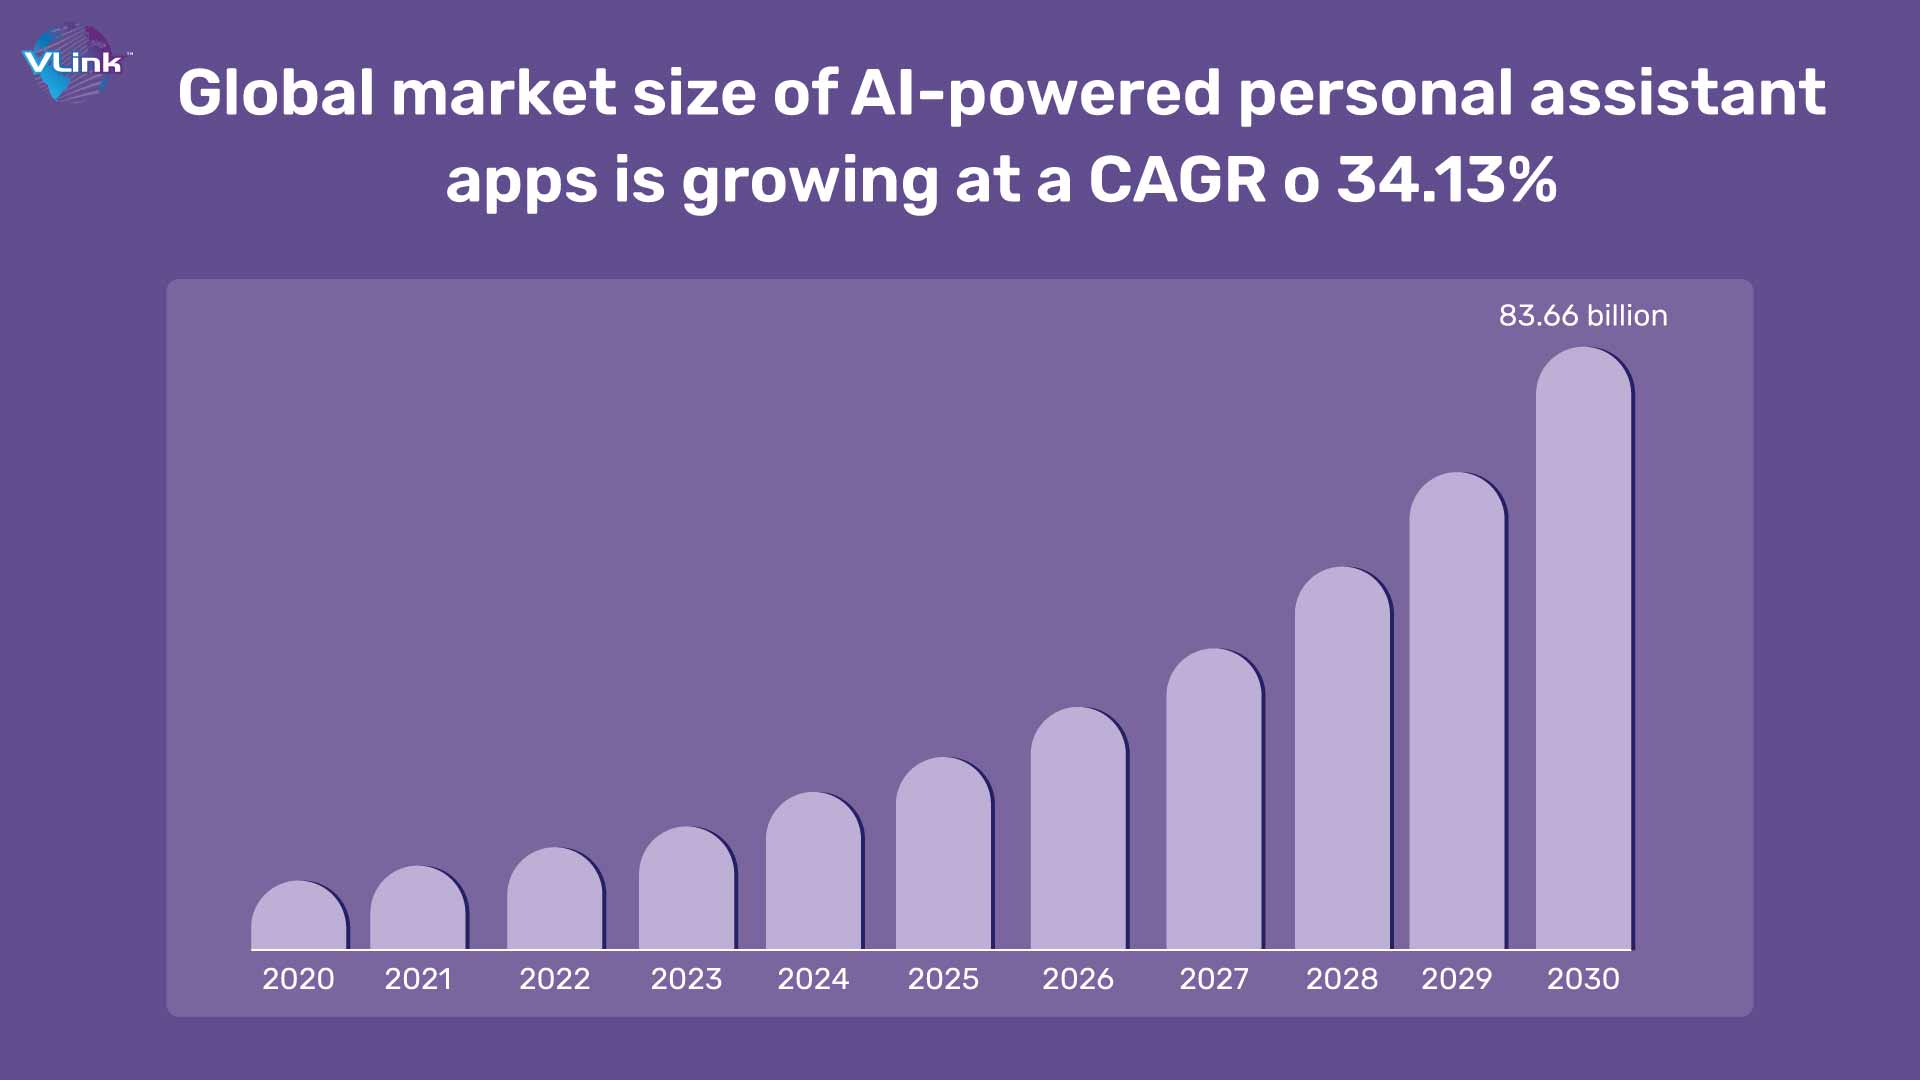 Global market size of AI-powered personal assistant apps is growing at a CAGR o 34.13%